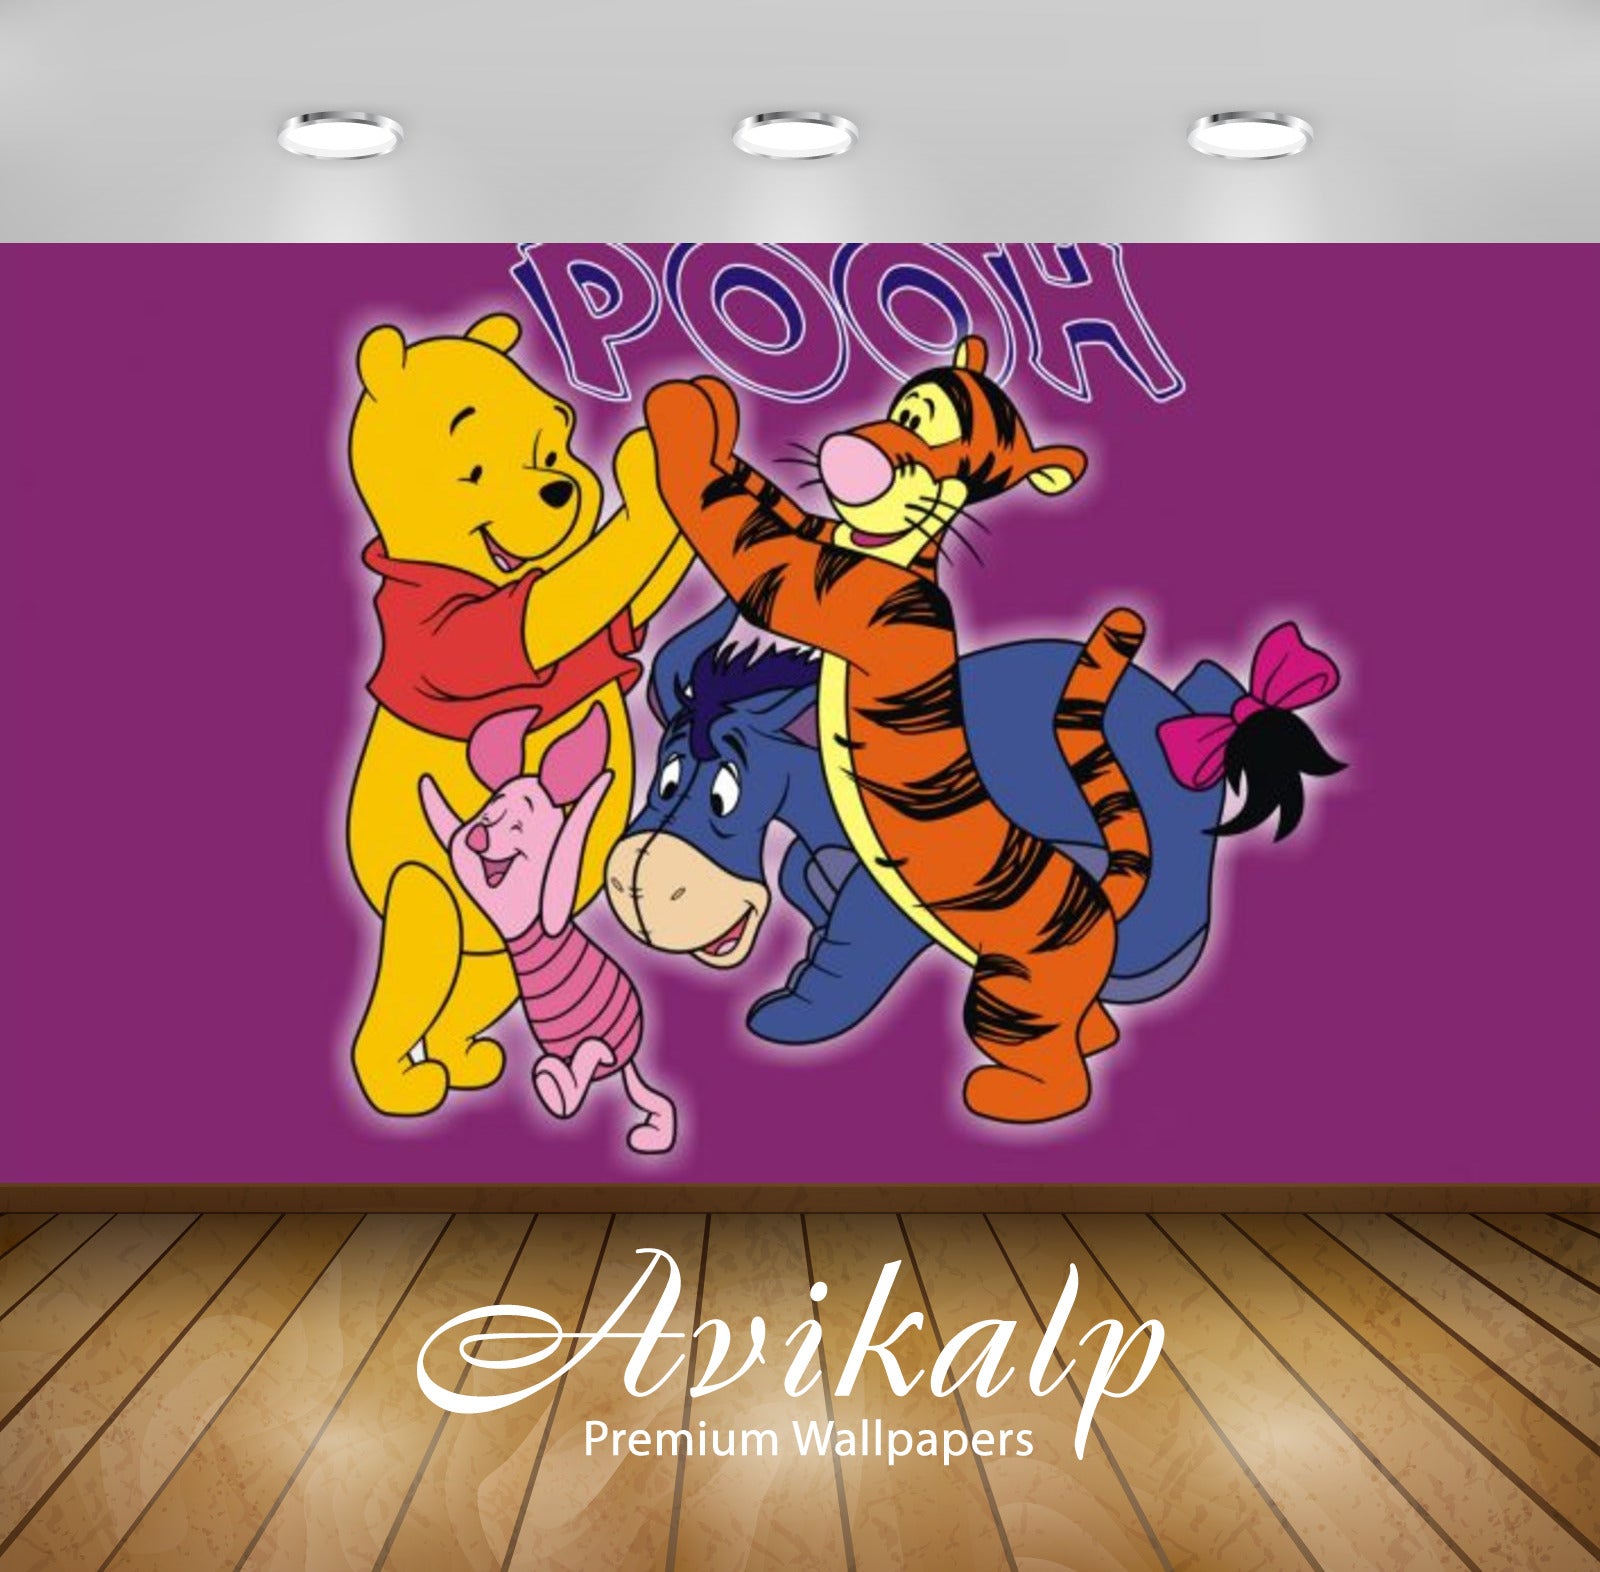 Avikalp Exclusive Awi2334 Winnie the Pooh Full HD Wallpapers for Living room, Hall, Kids Room, Kitch